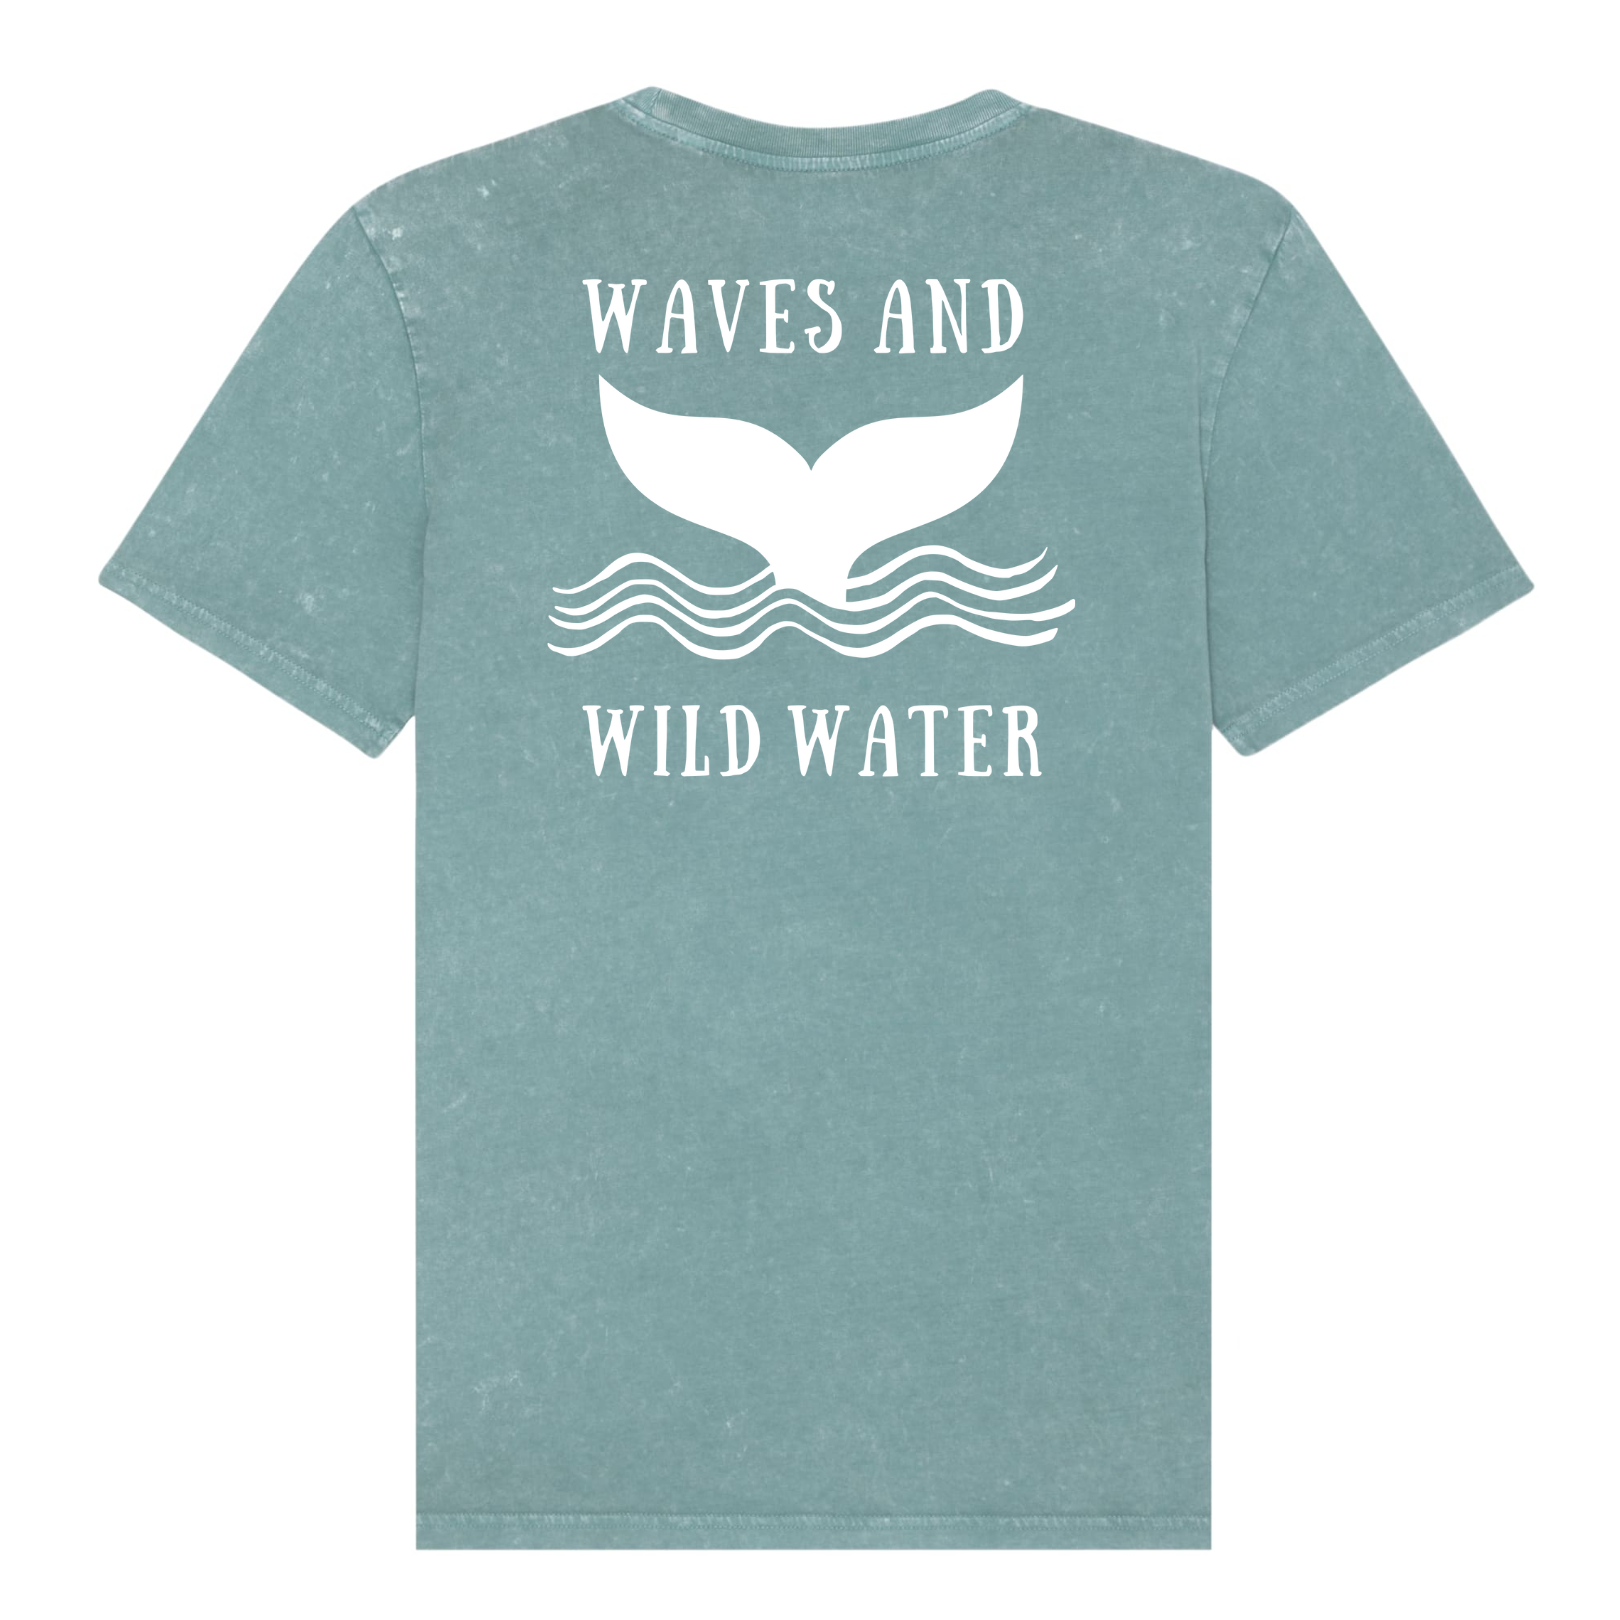 The back of a green t-shirt with Waves & Wild Water logo, depicting a whale tail coming out of waves, printed in white ink.